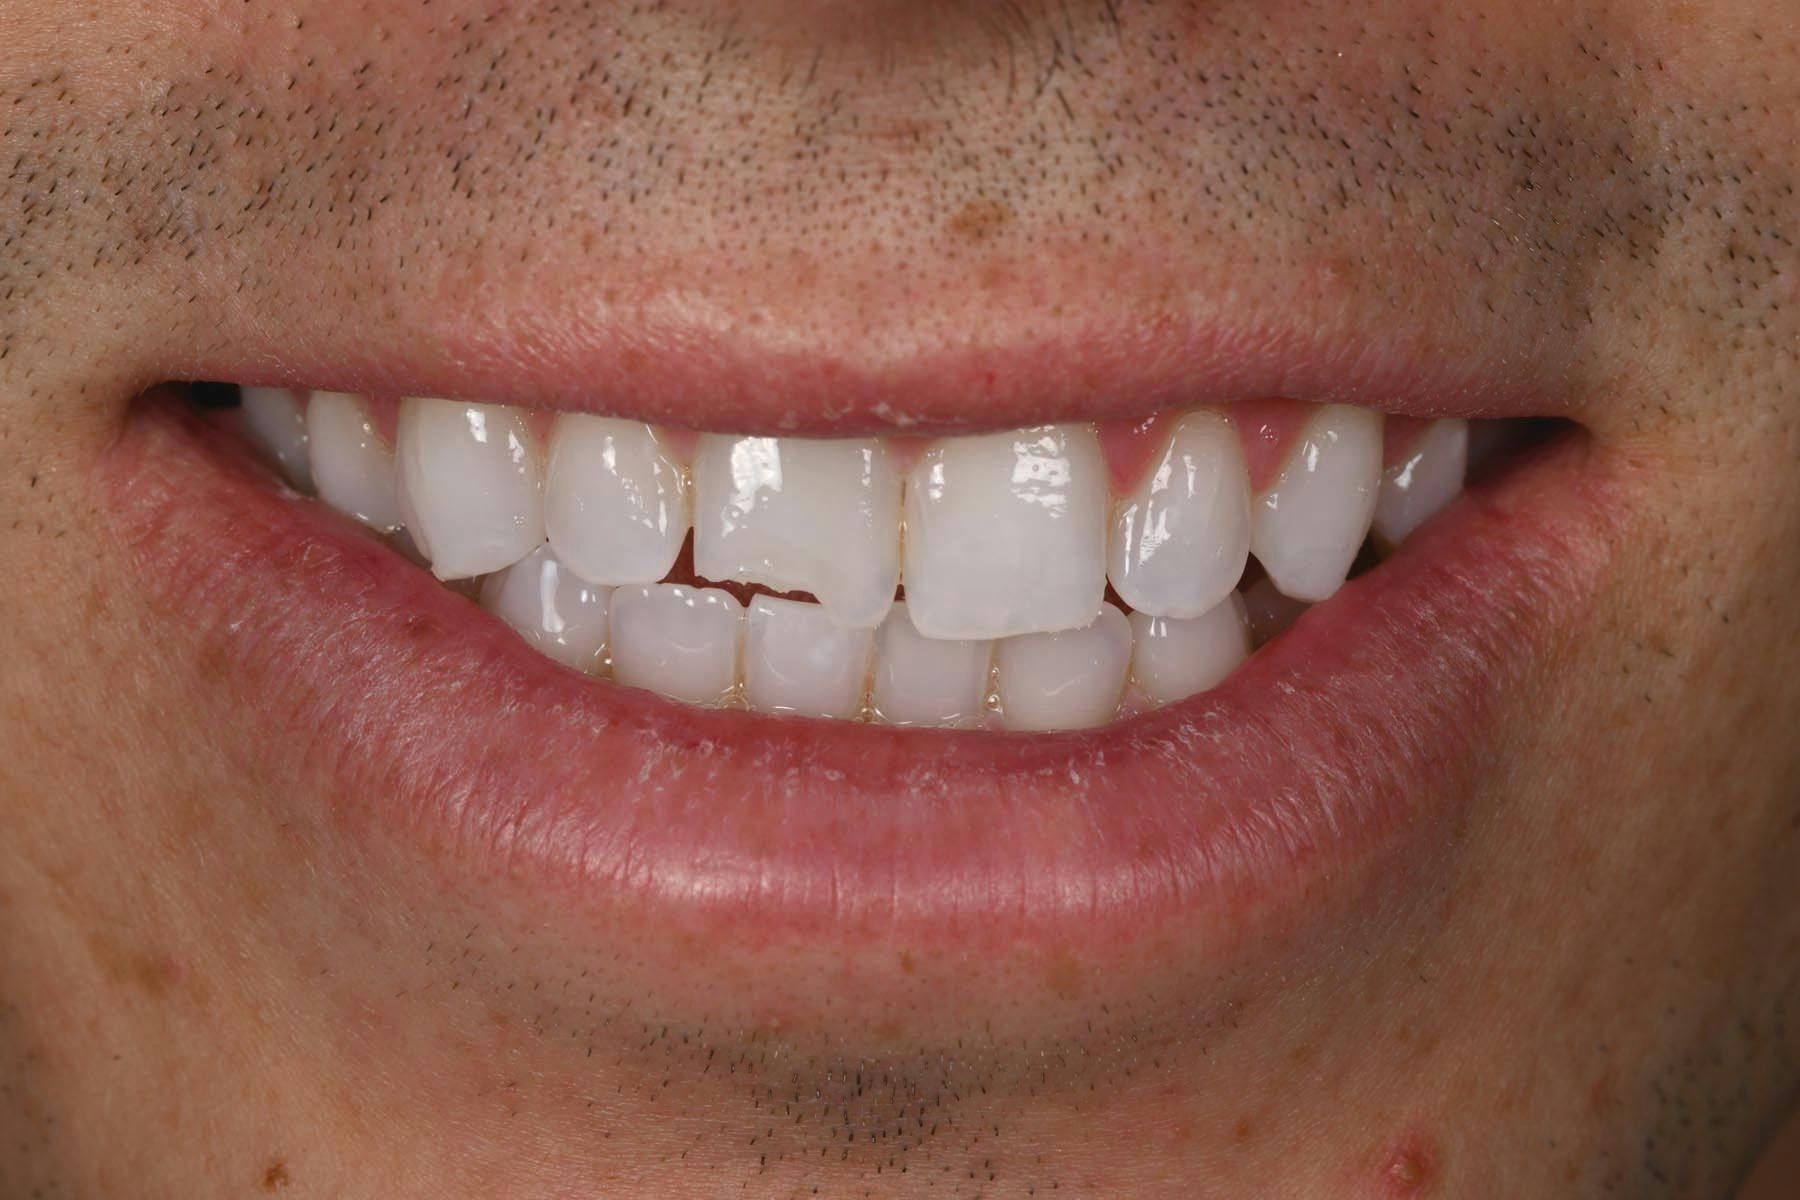 Using a Simplified 2-Layer Technique to Restore a Fractured Maxillary Central Incisor